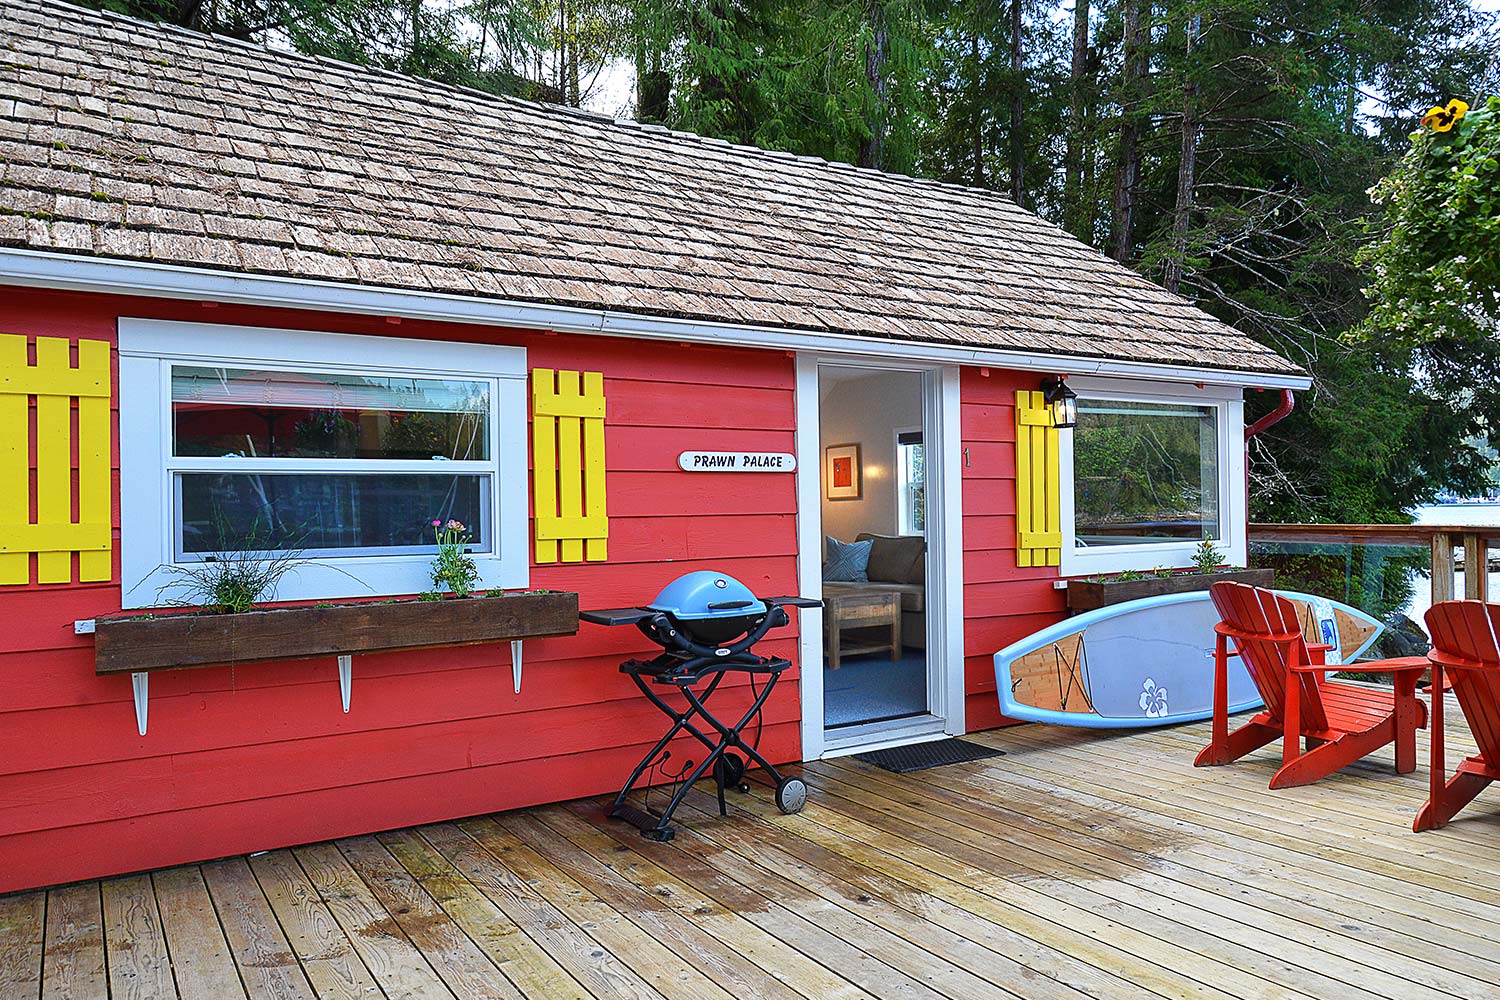 A Weber BBQ and stand-up paddleboard on the front deck of Prawn Palace. A cute cottage situated over the Pender Harbour.